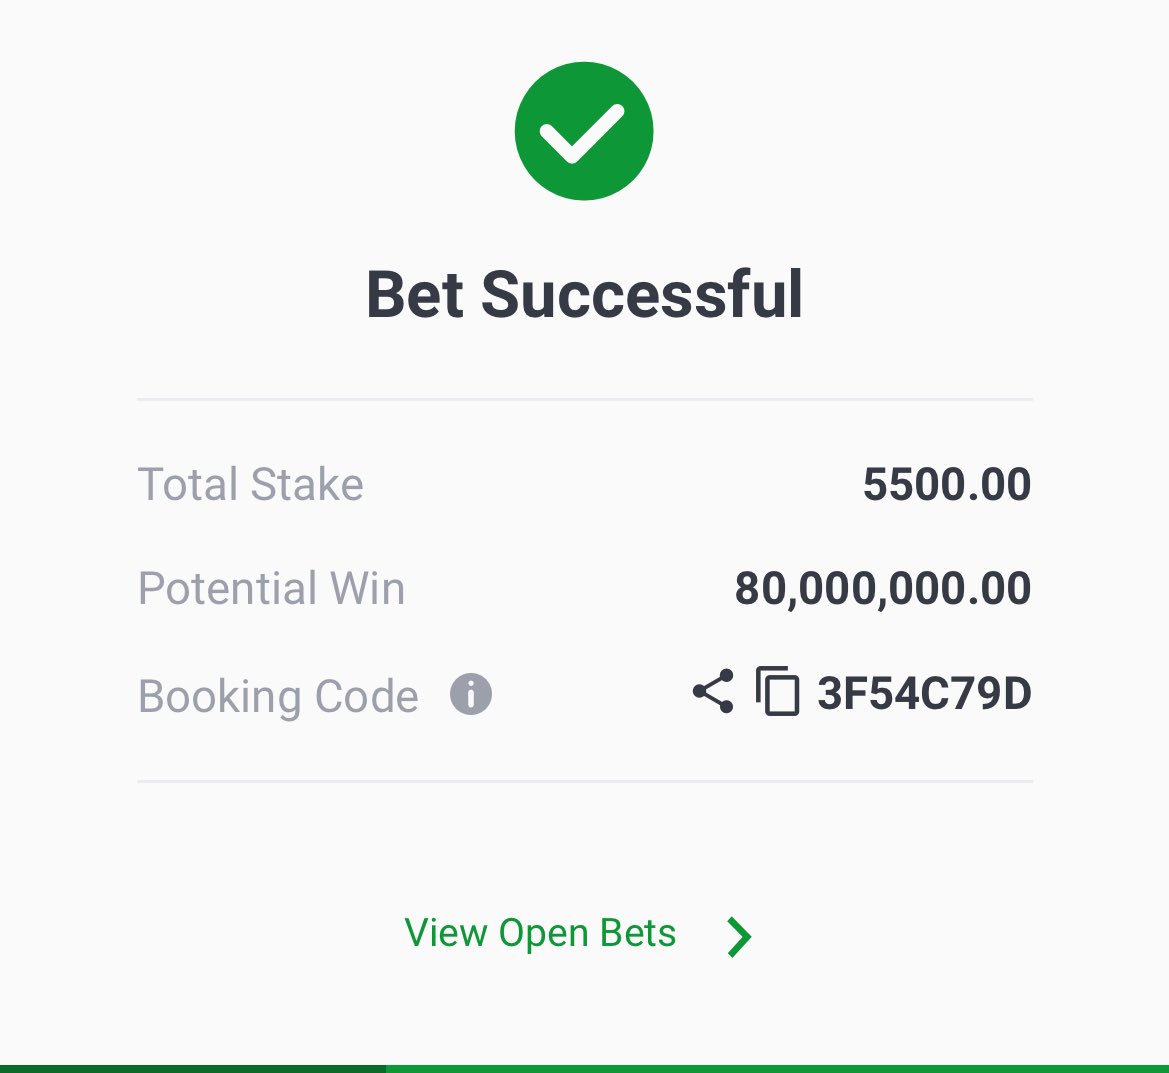 One Big win to change the story 

Sportybet: 3F54C79D

100 odds posted on Tel: t.me/cindymonel